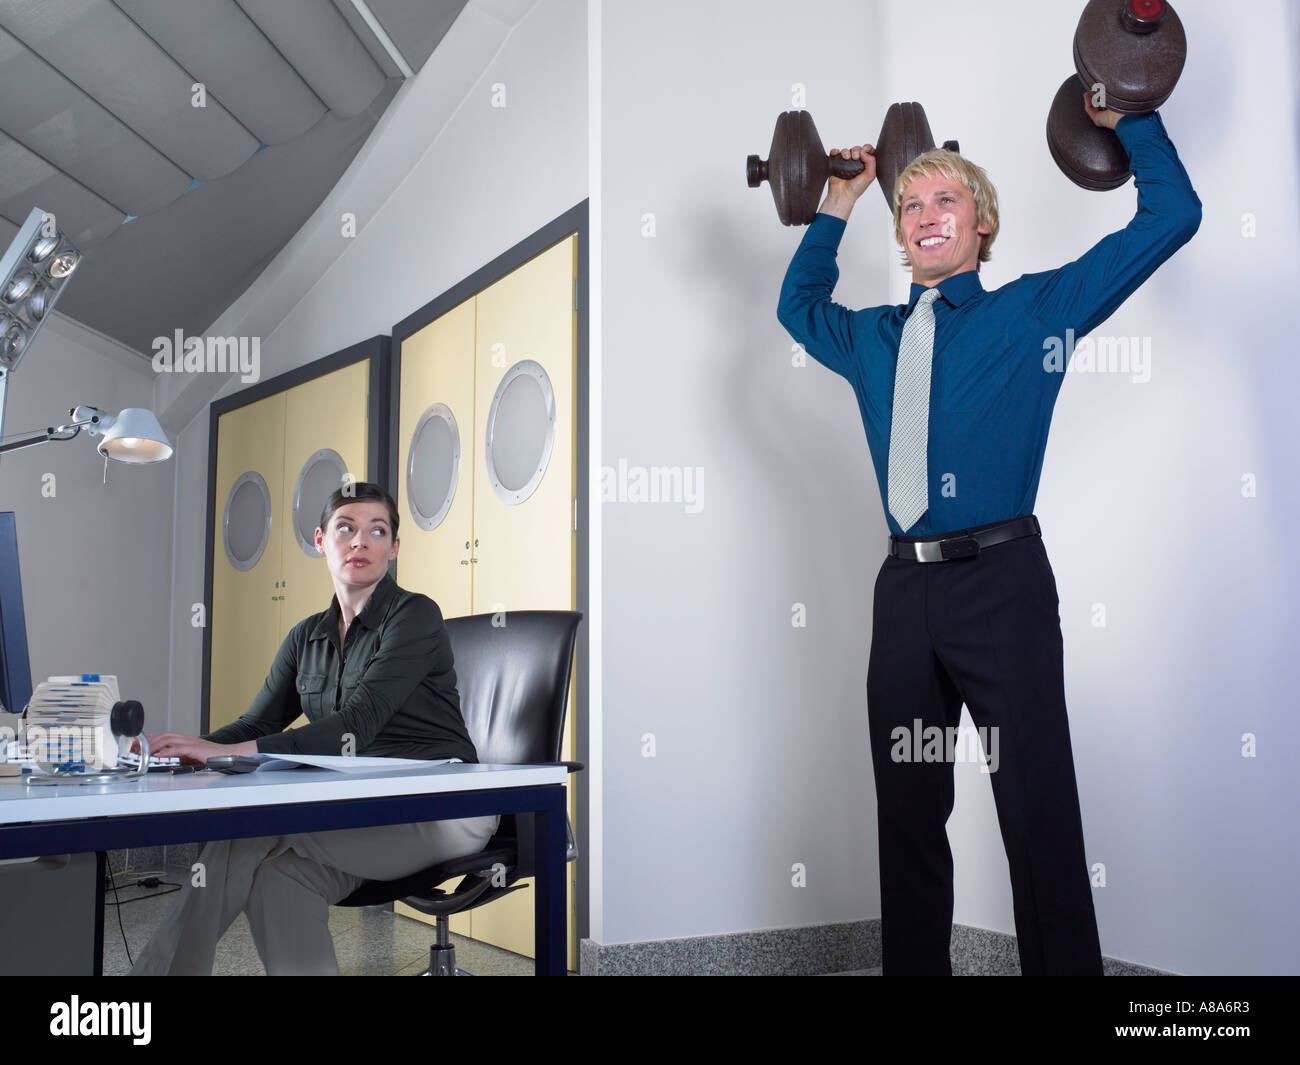 Office worker lifting weights Stock Photo